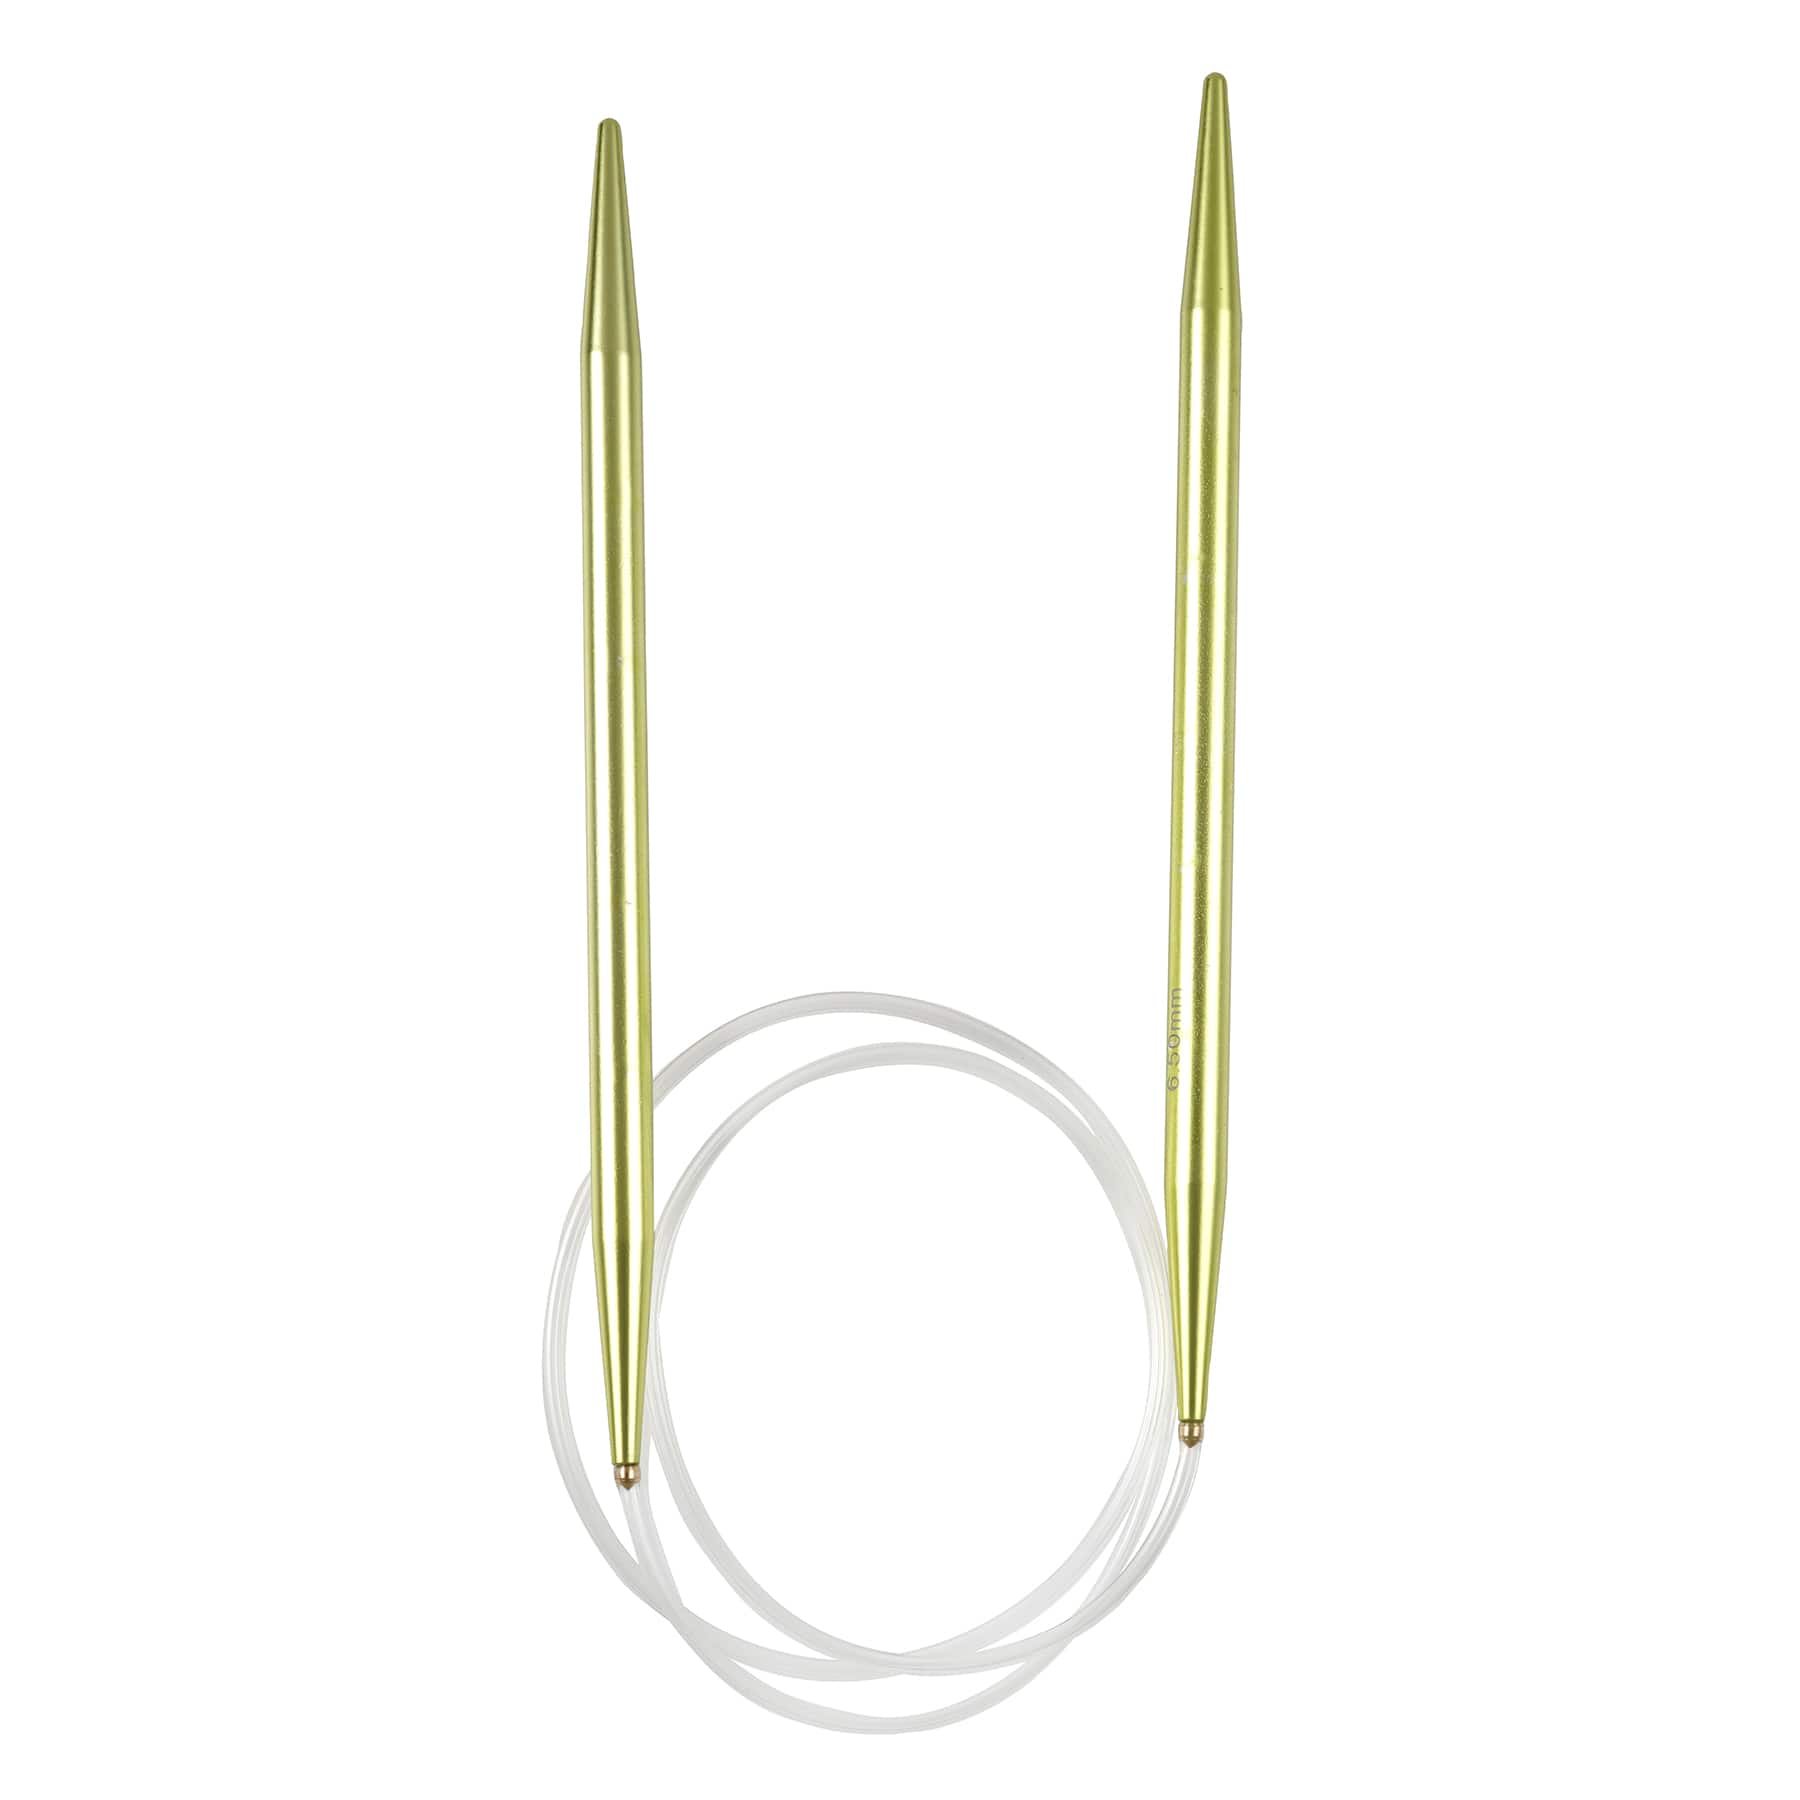 11 Plastic Circular Needles by Loops & Threads®